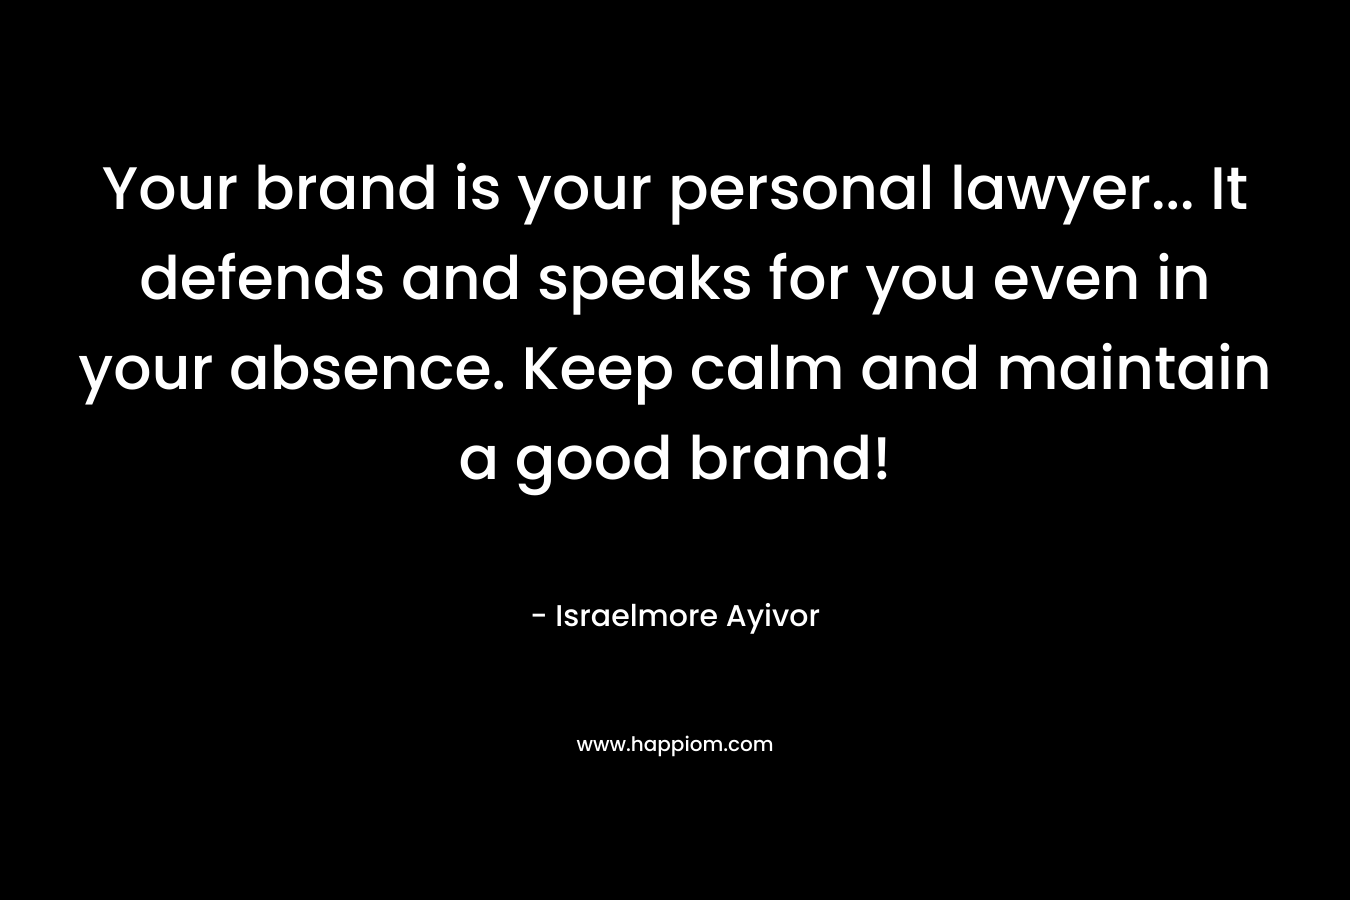 Your brand is your personal lawyer… It defends and speaks for you even in your absence. Keep calm and maintain a good brand! – Israelmore Ayivor